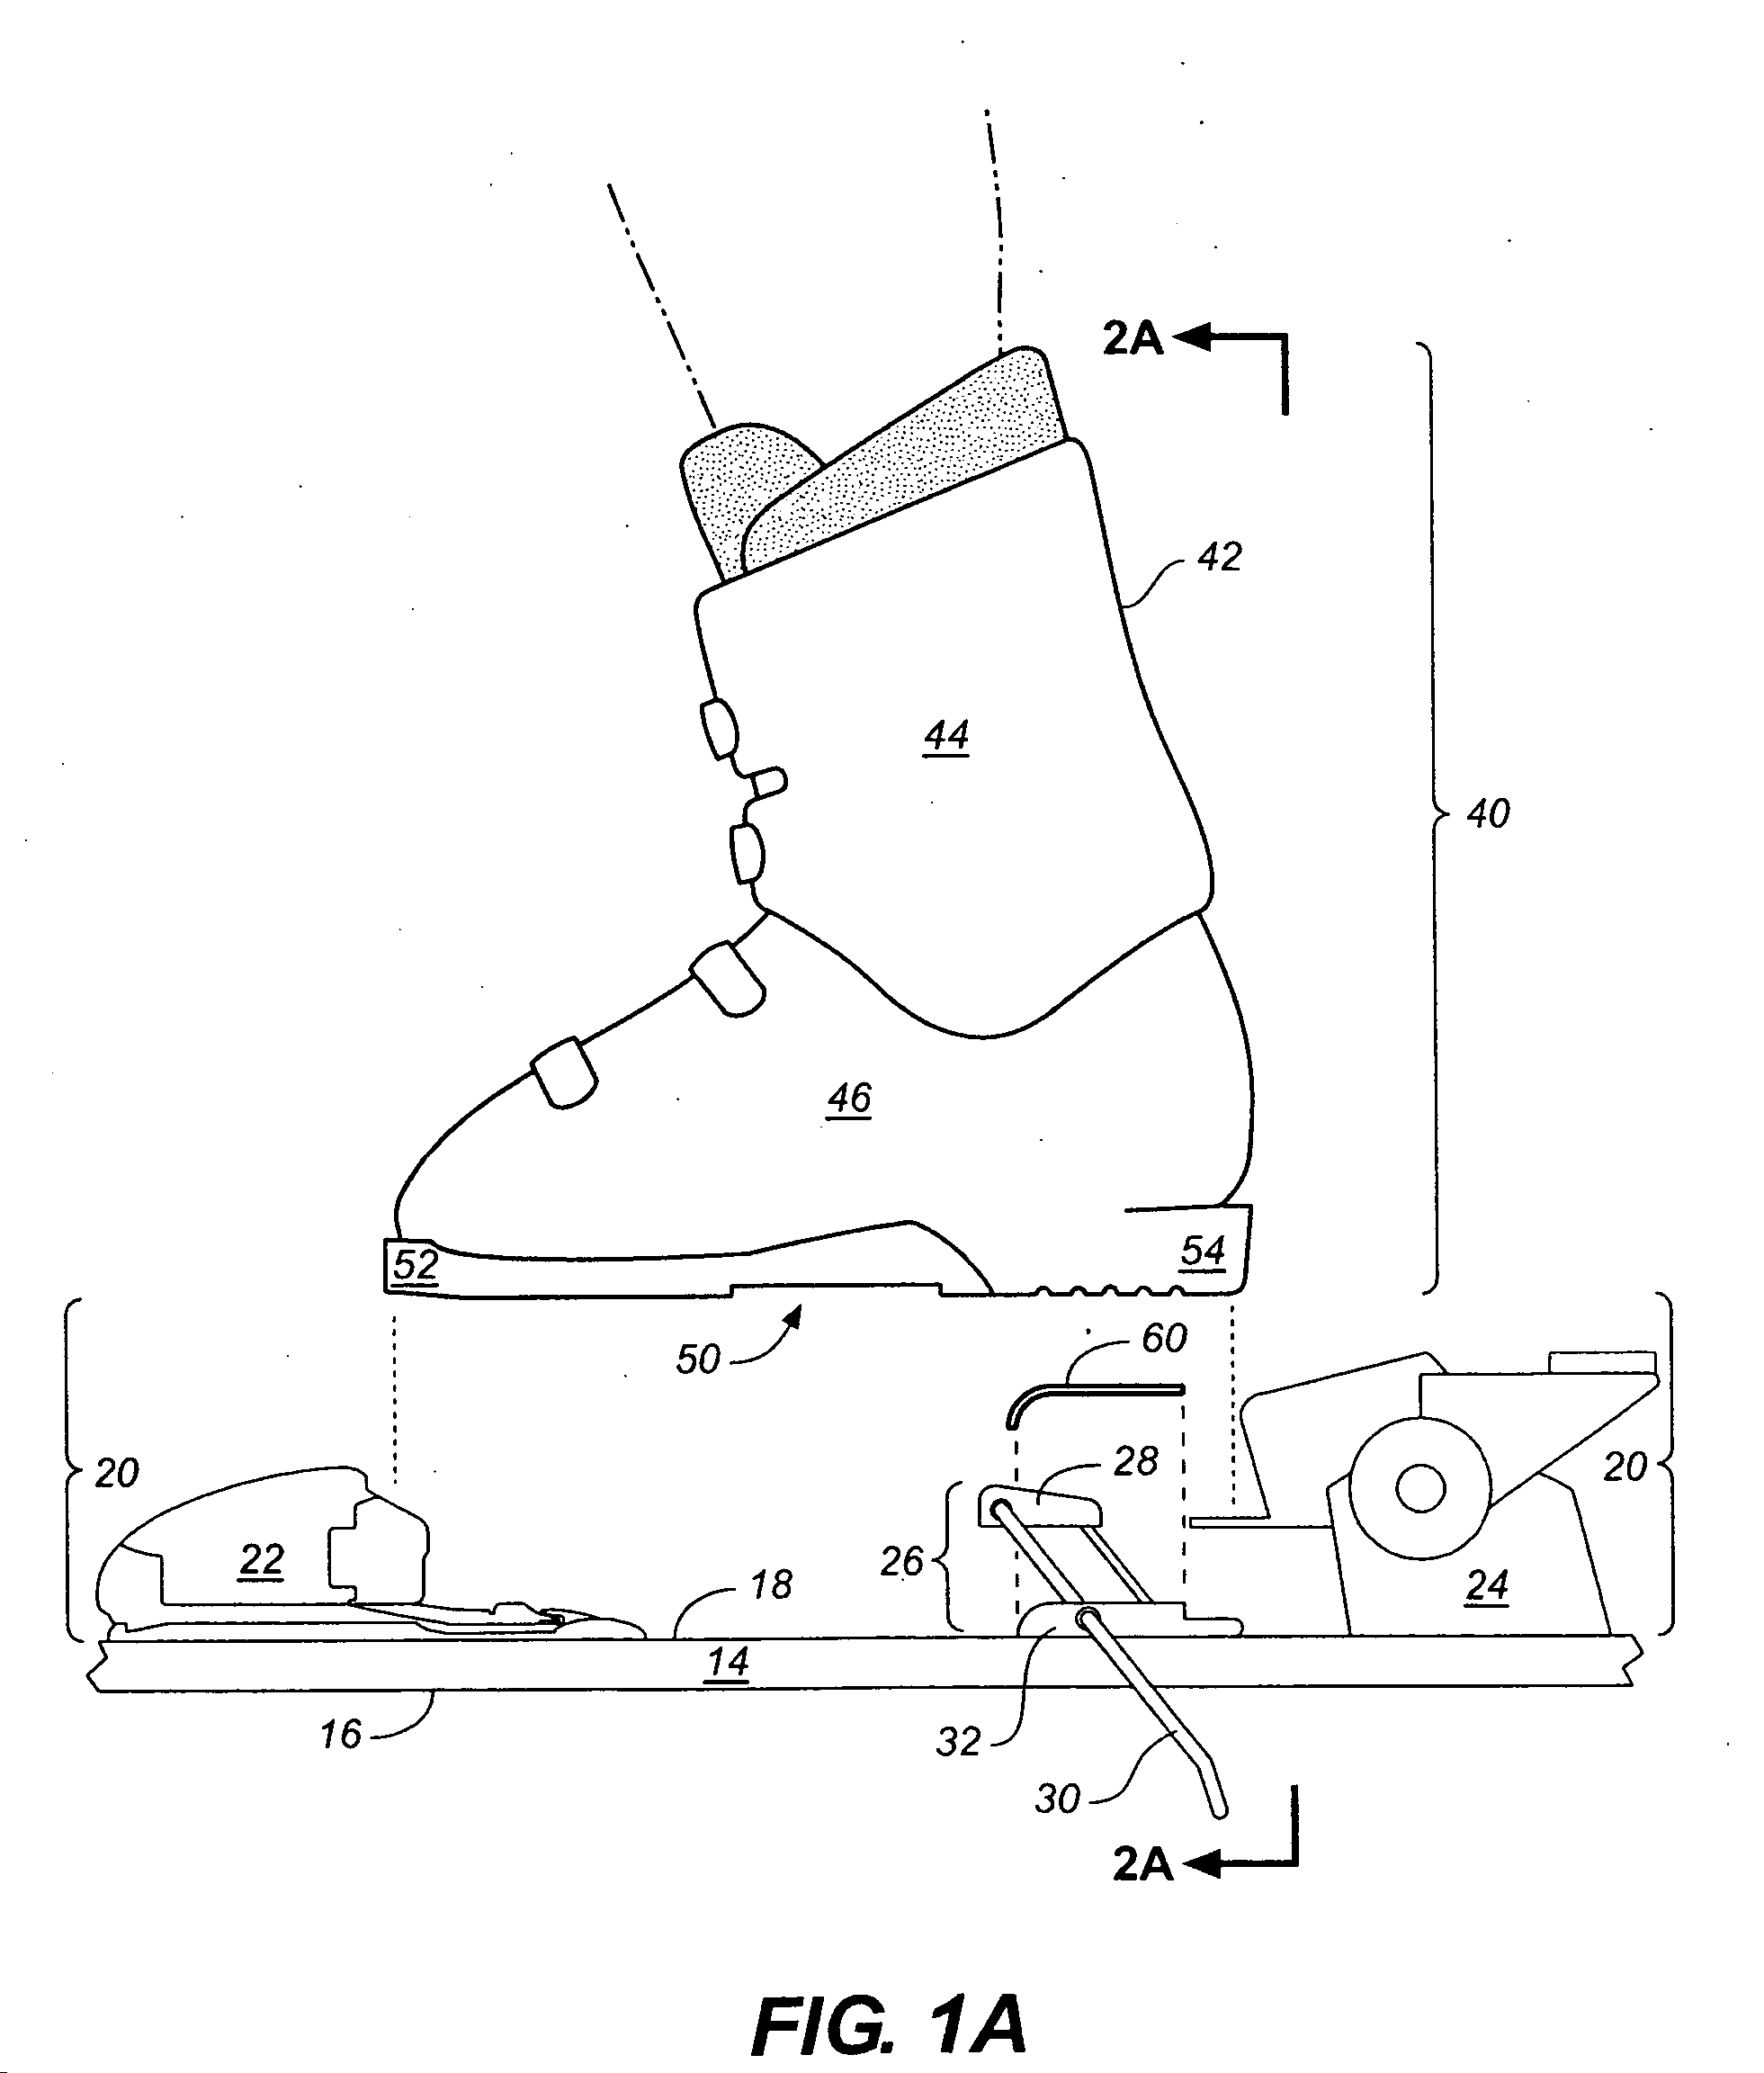 Apparatus and method for canting a skier